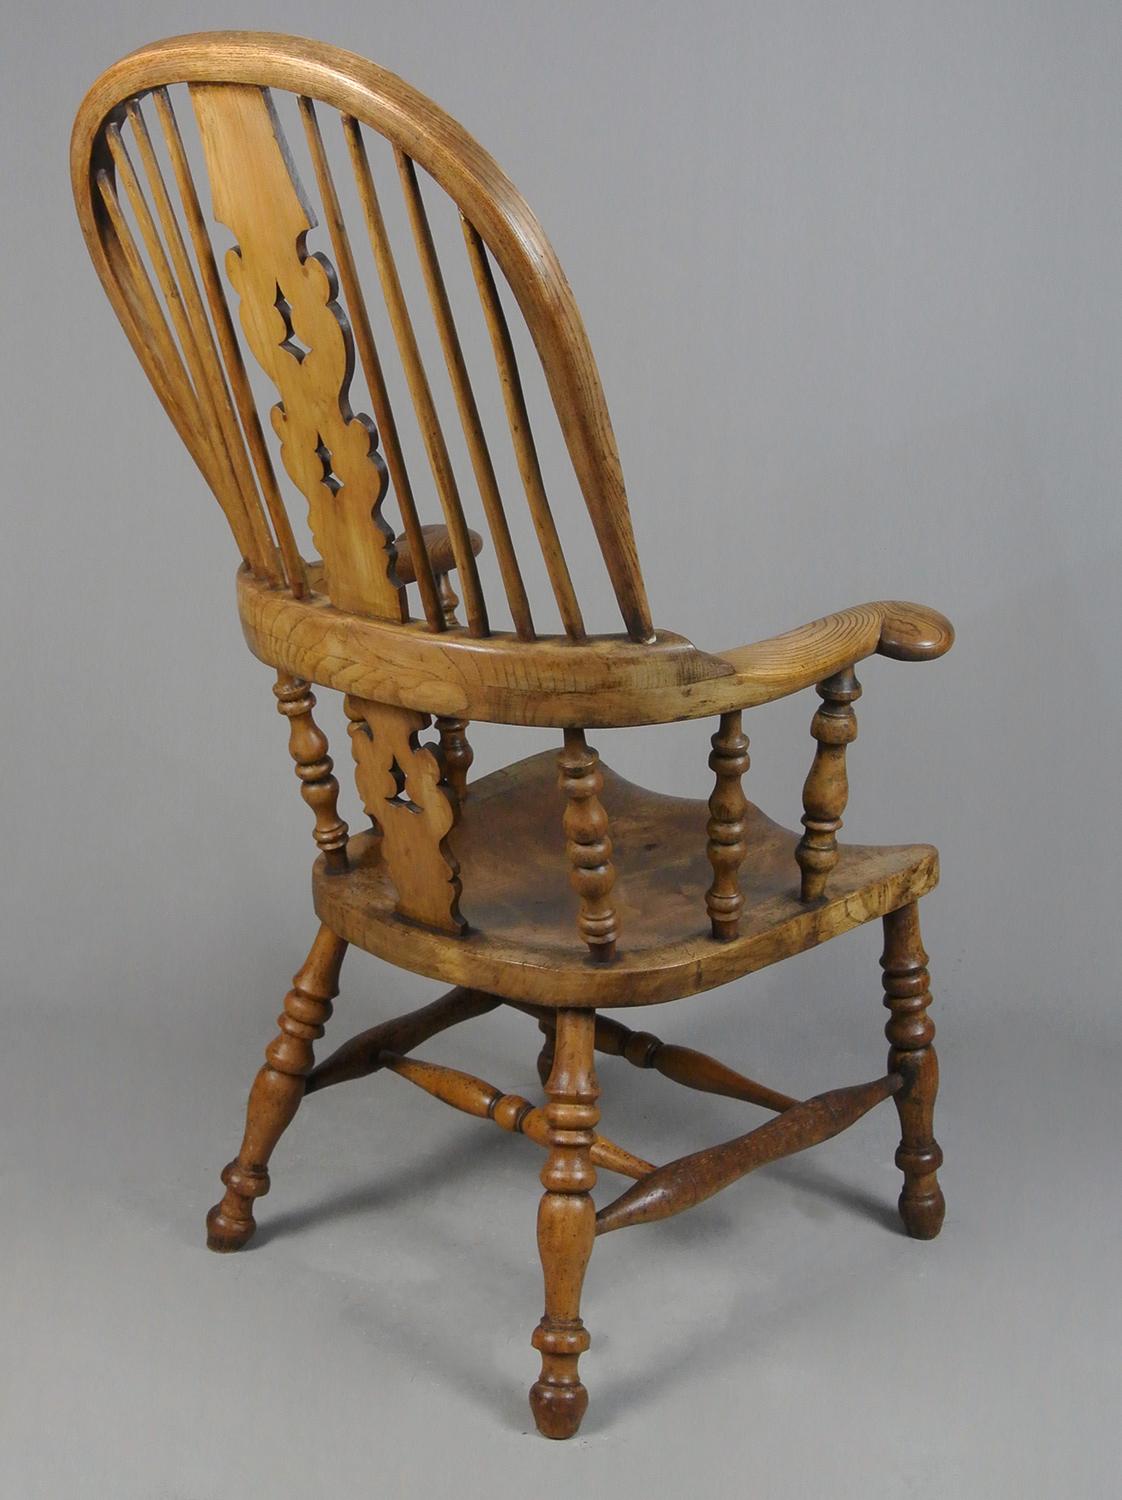 Rare 19th Century Yew, Elm and Ash Windsor Chair c. 1850 For Sale 4